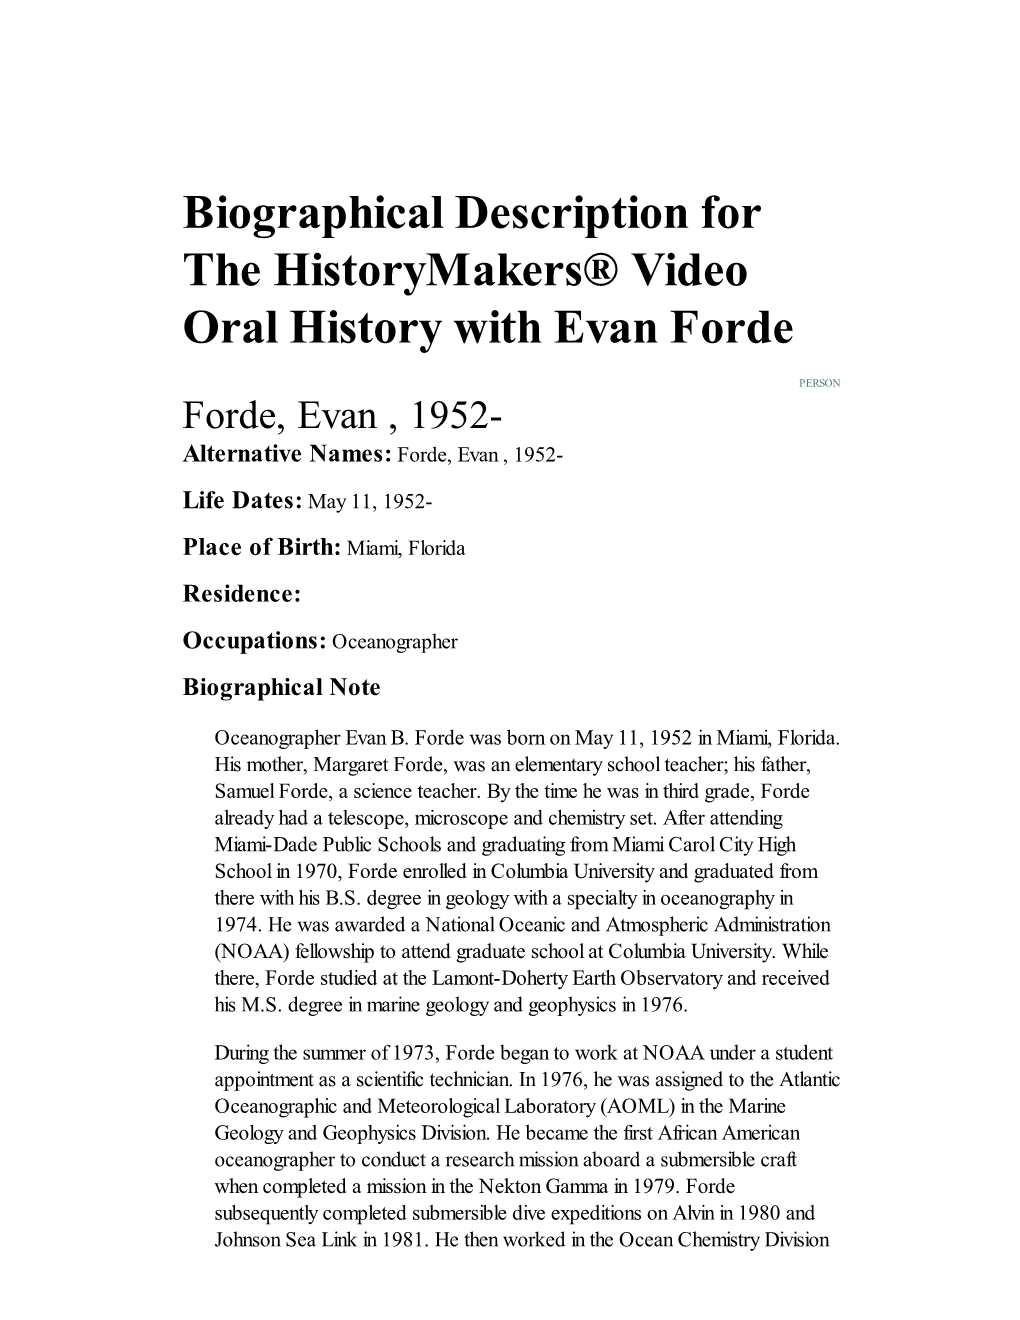 Biographical Description for the Historymakers® Video Oral History with Evan Forde